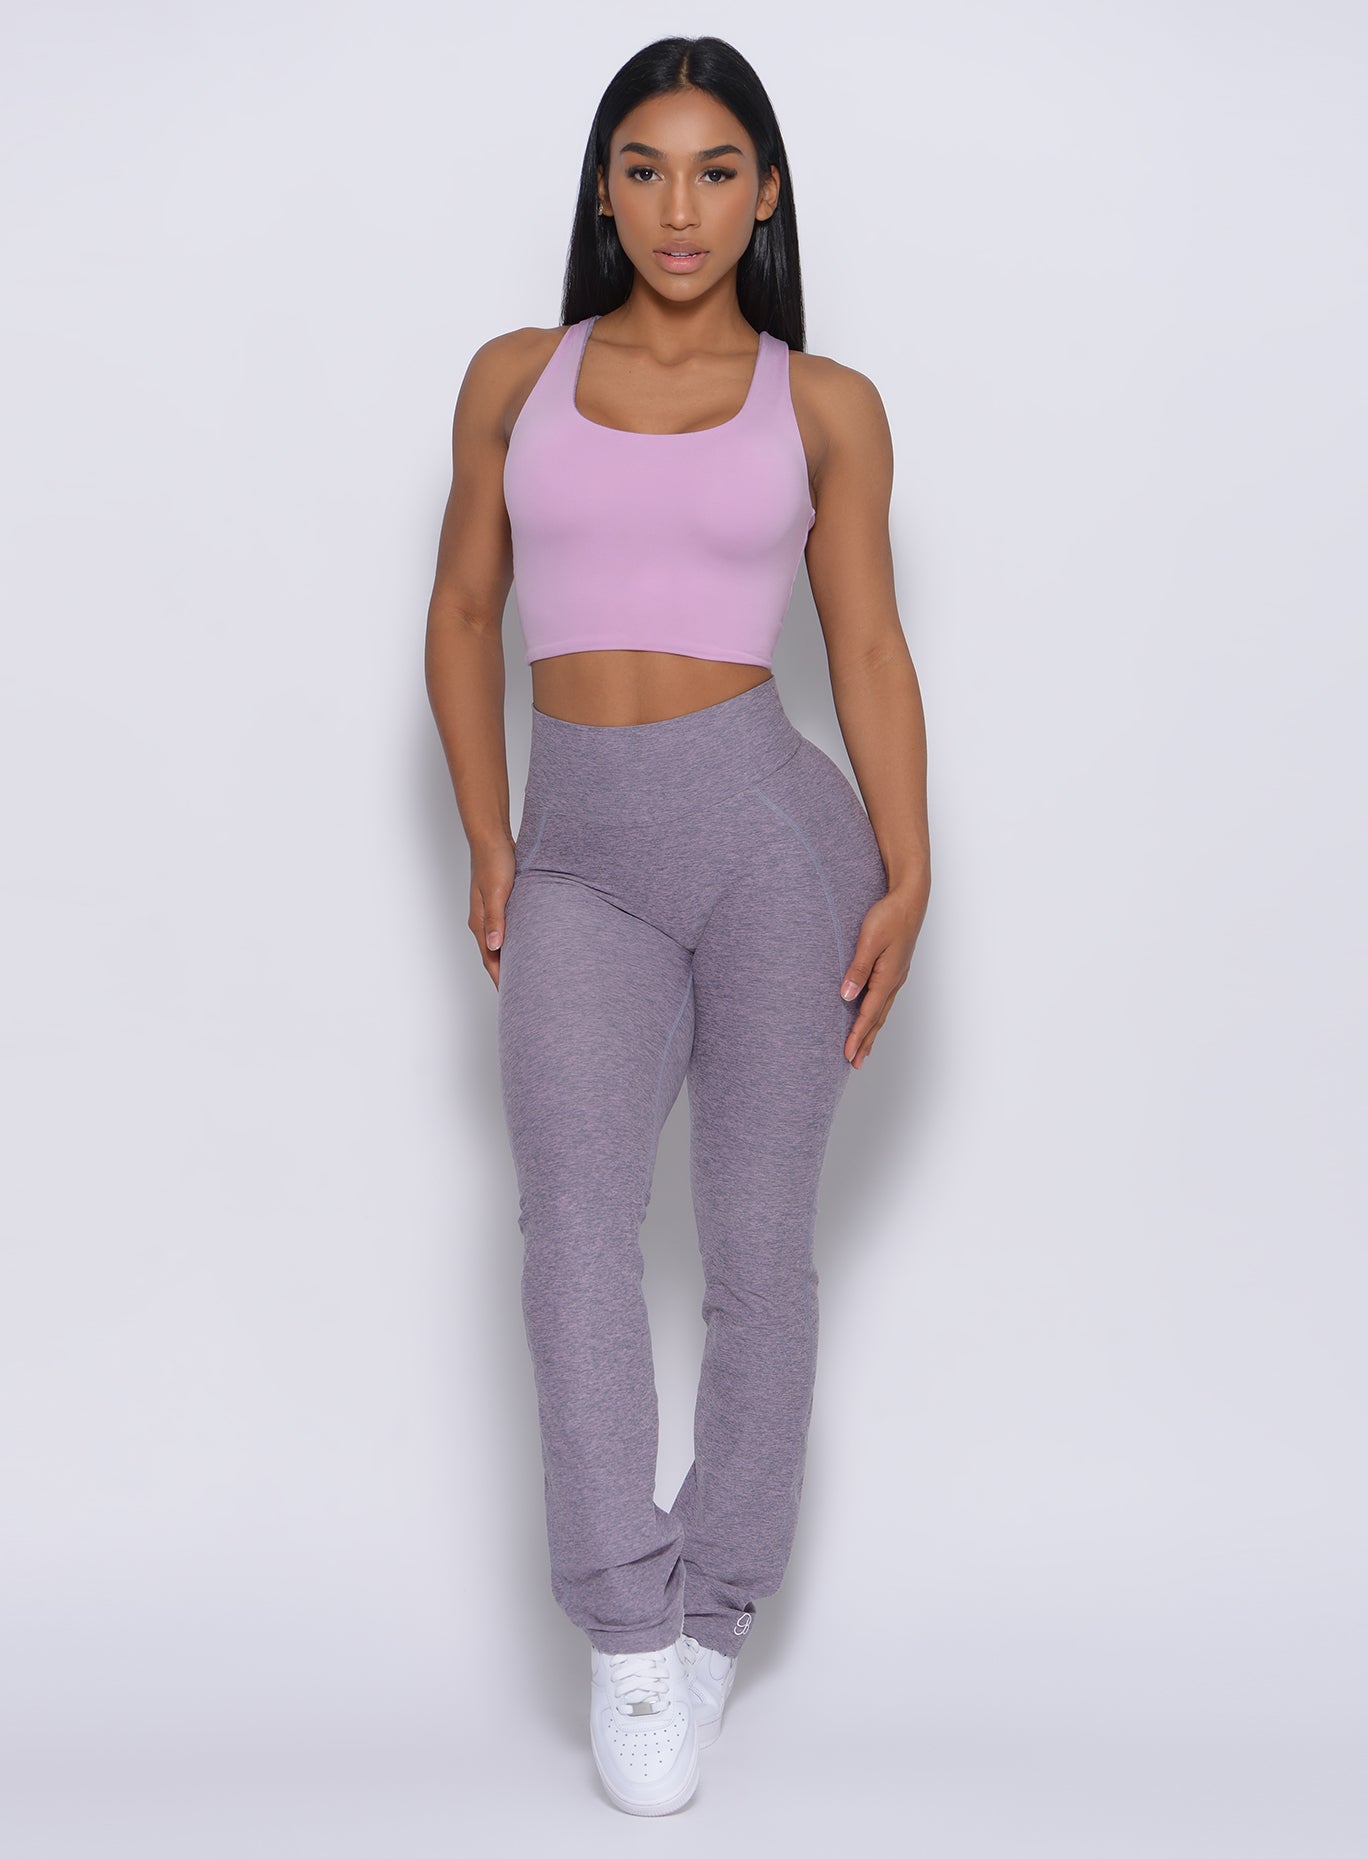 Straight Up Leggings - colorgroup